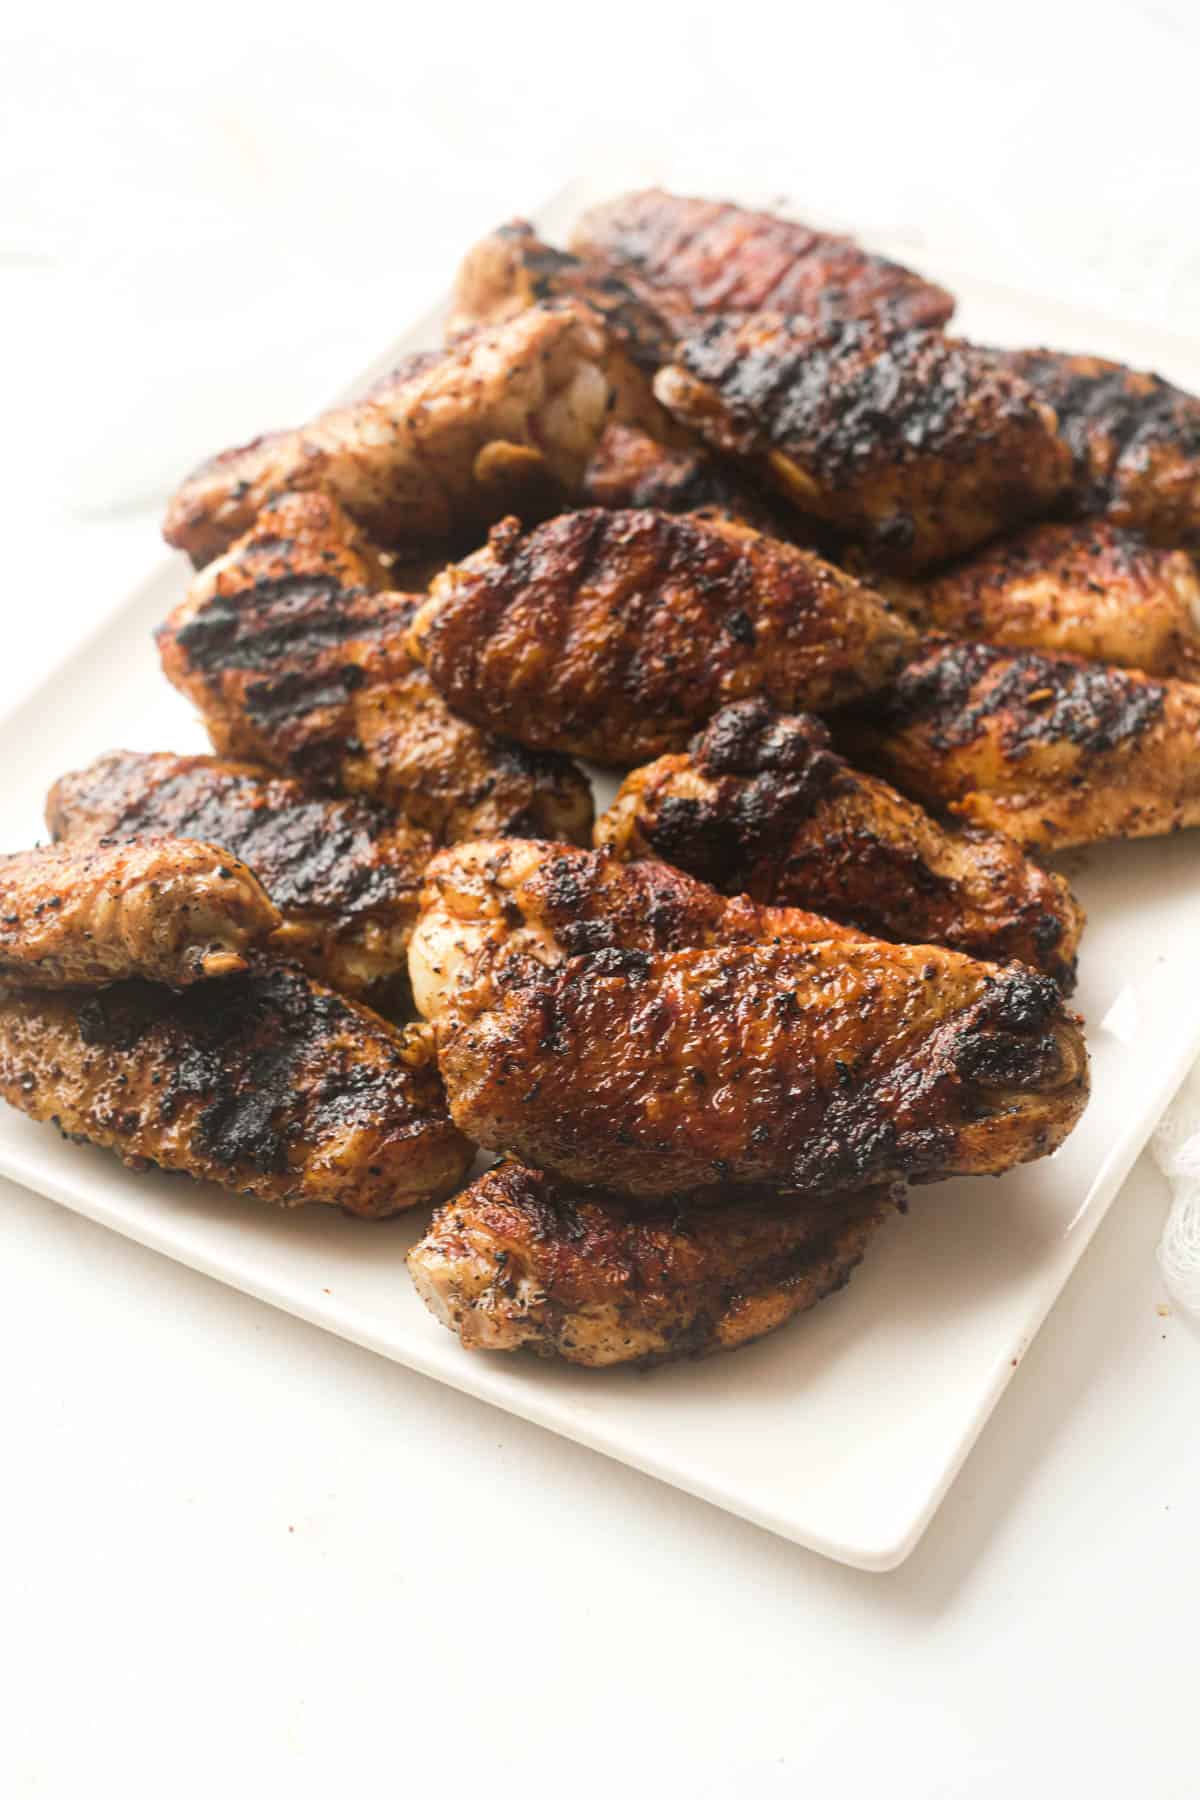 the completed grilled chicken wings recipe served on a white platter